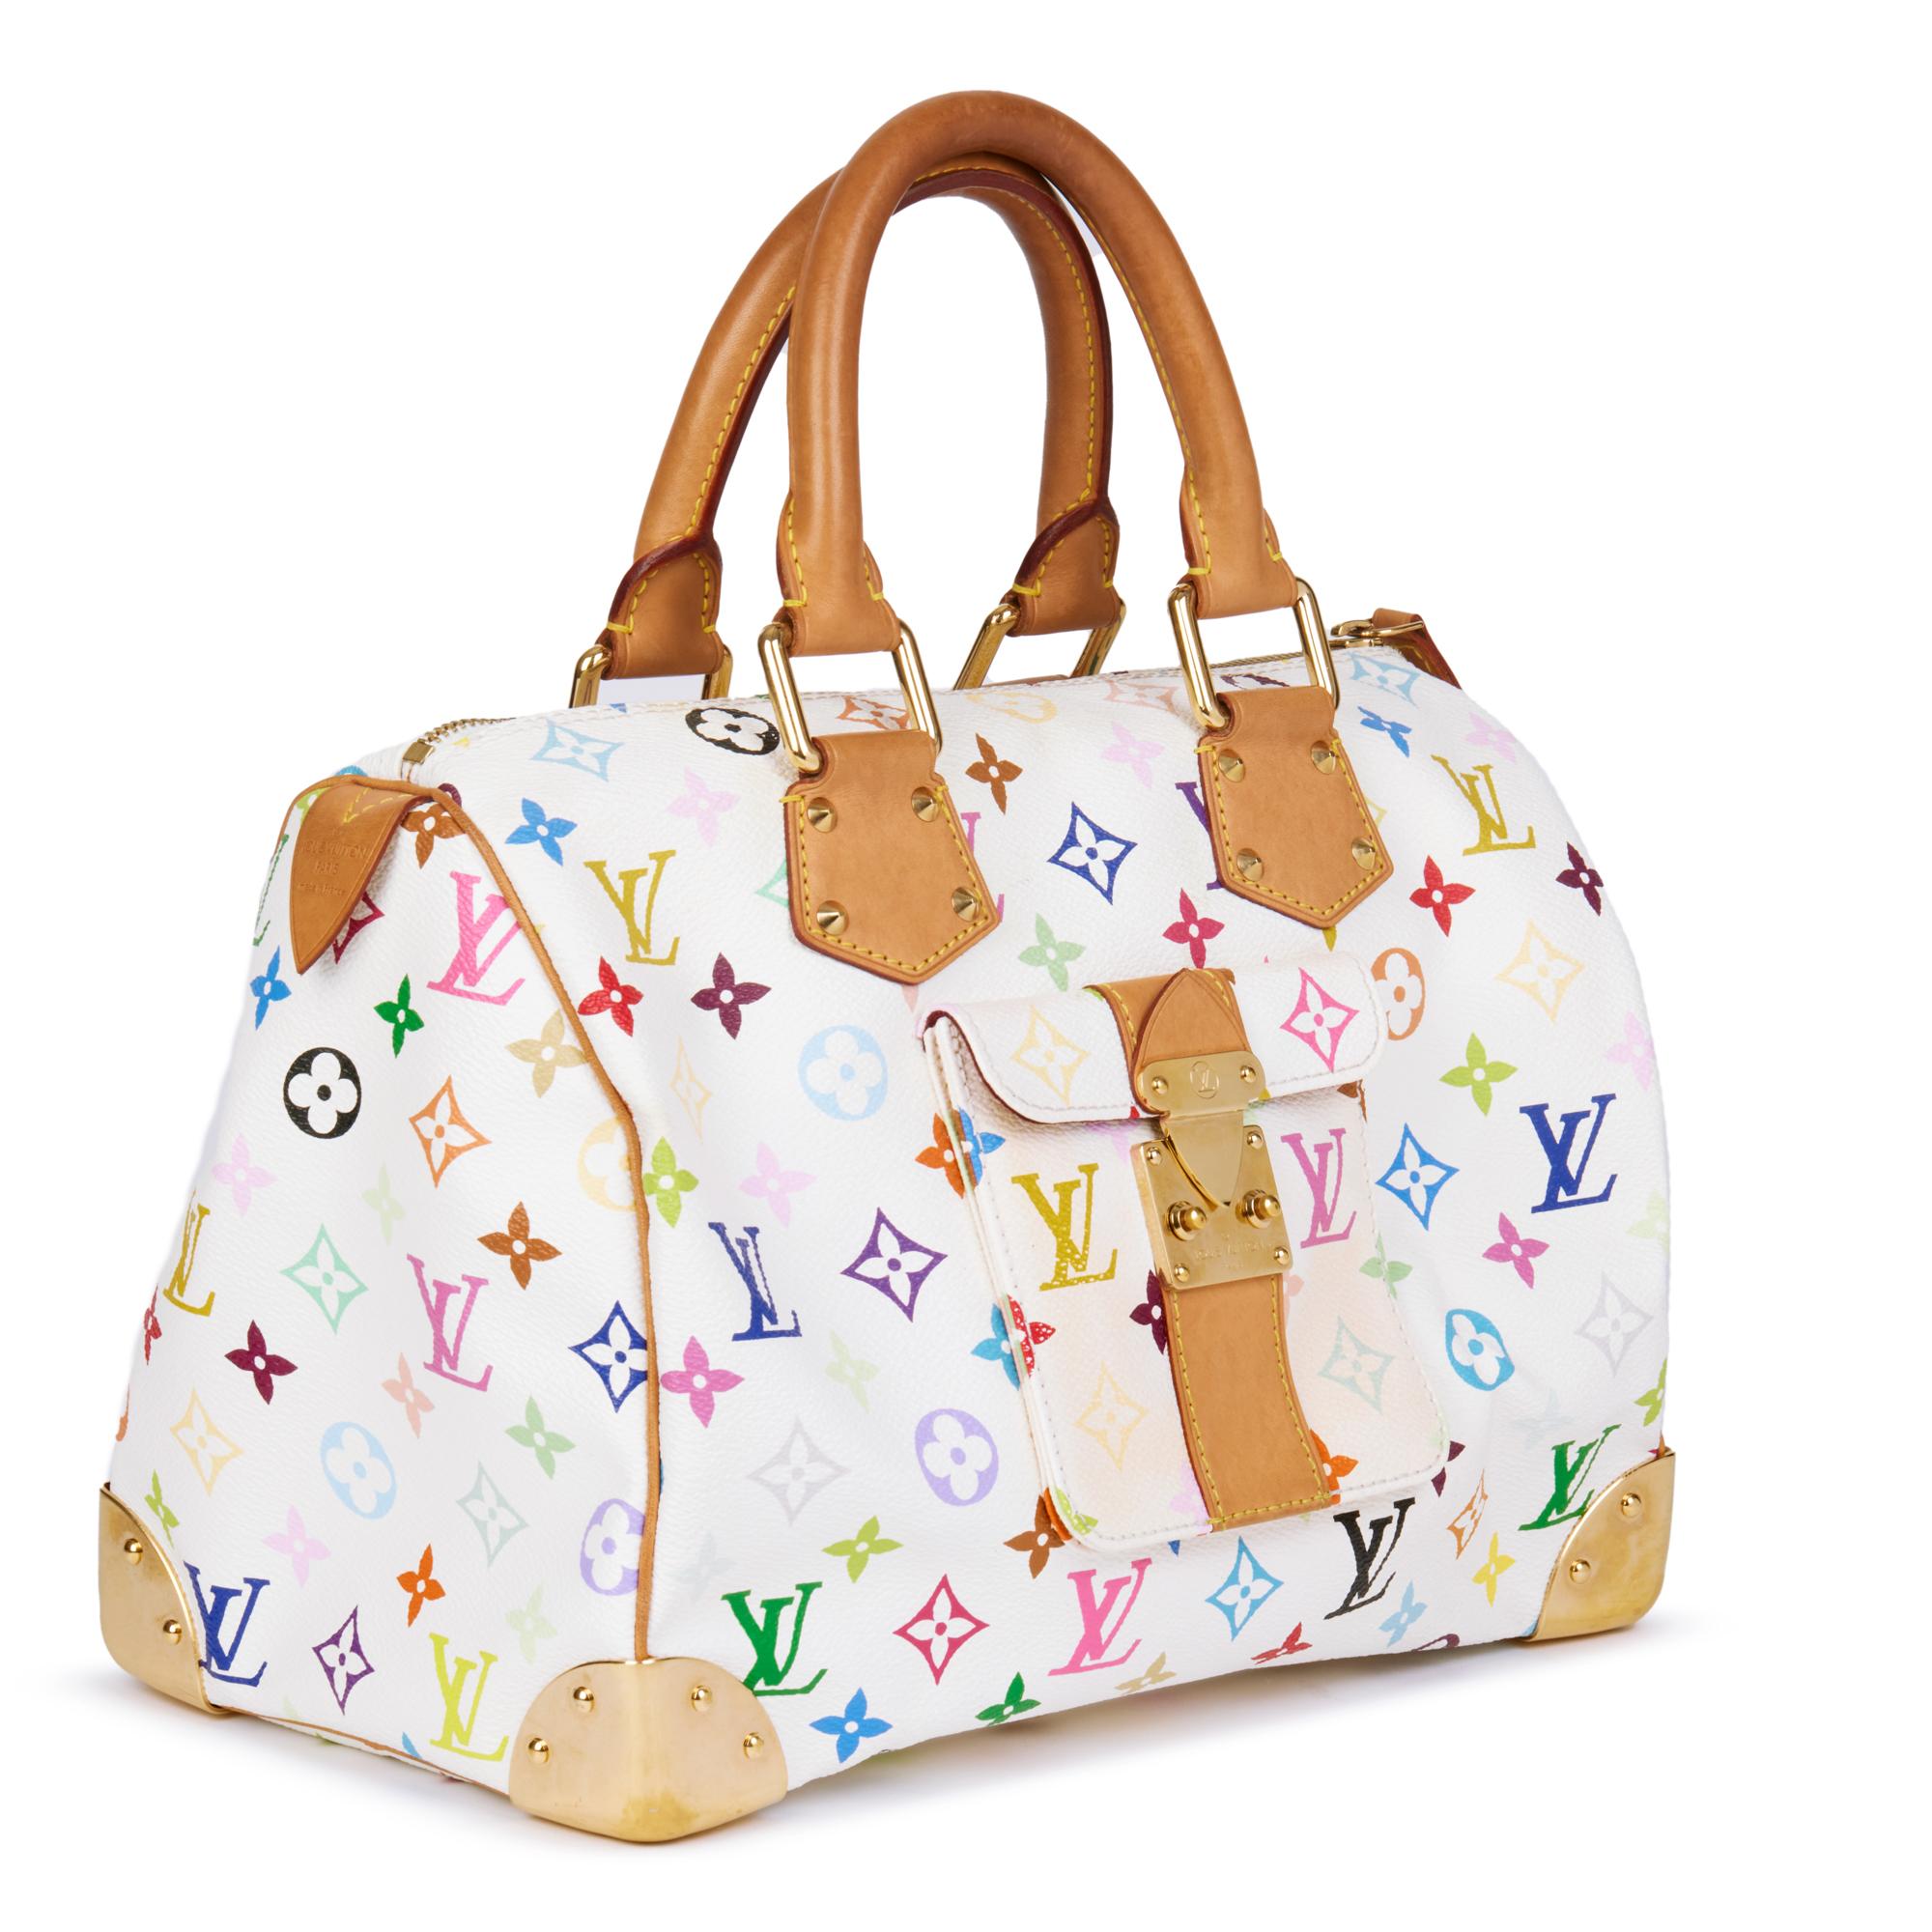 LOUIS VUITTON
White Multicolour Monogram Coated Canvas & Vachetta Leather Speedy 30

Xupes Reference: HB4538
Serial Number: SP1003
Age (Circa): 2003
Accompanied By: Louis Vuitton Dust Bag, Invoice
Authenticity Details: Date Stamp (Made in